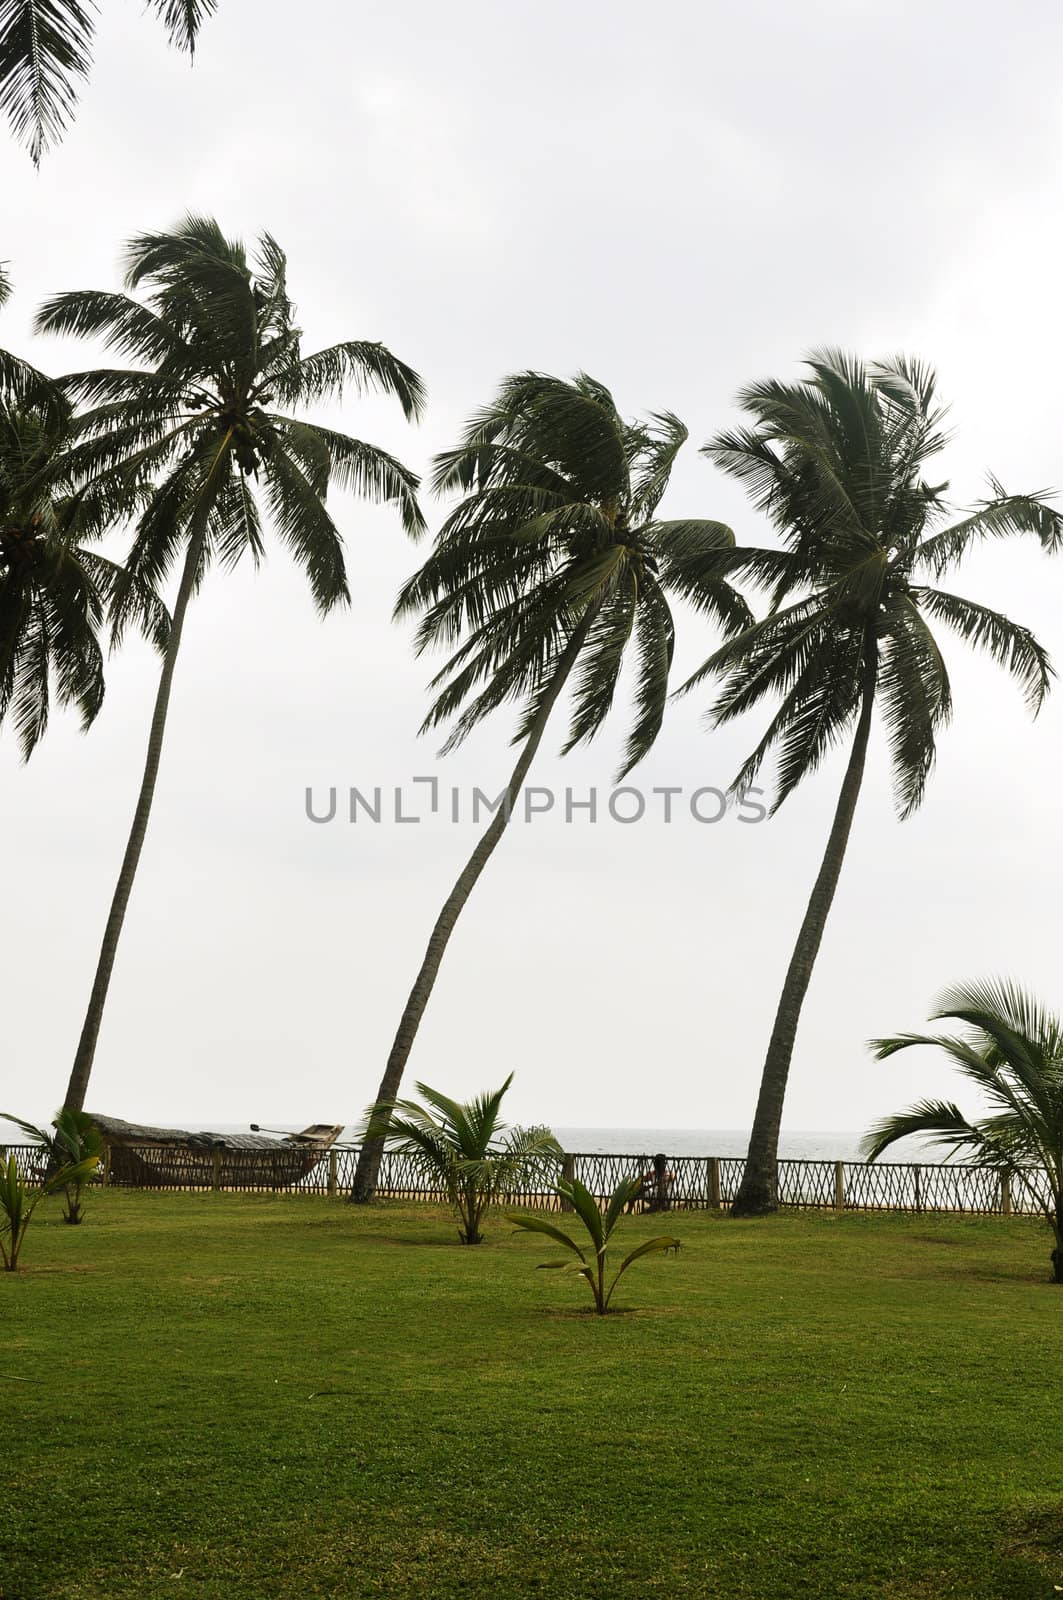 Palm trees in a lawn by the beach by kdreams02